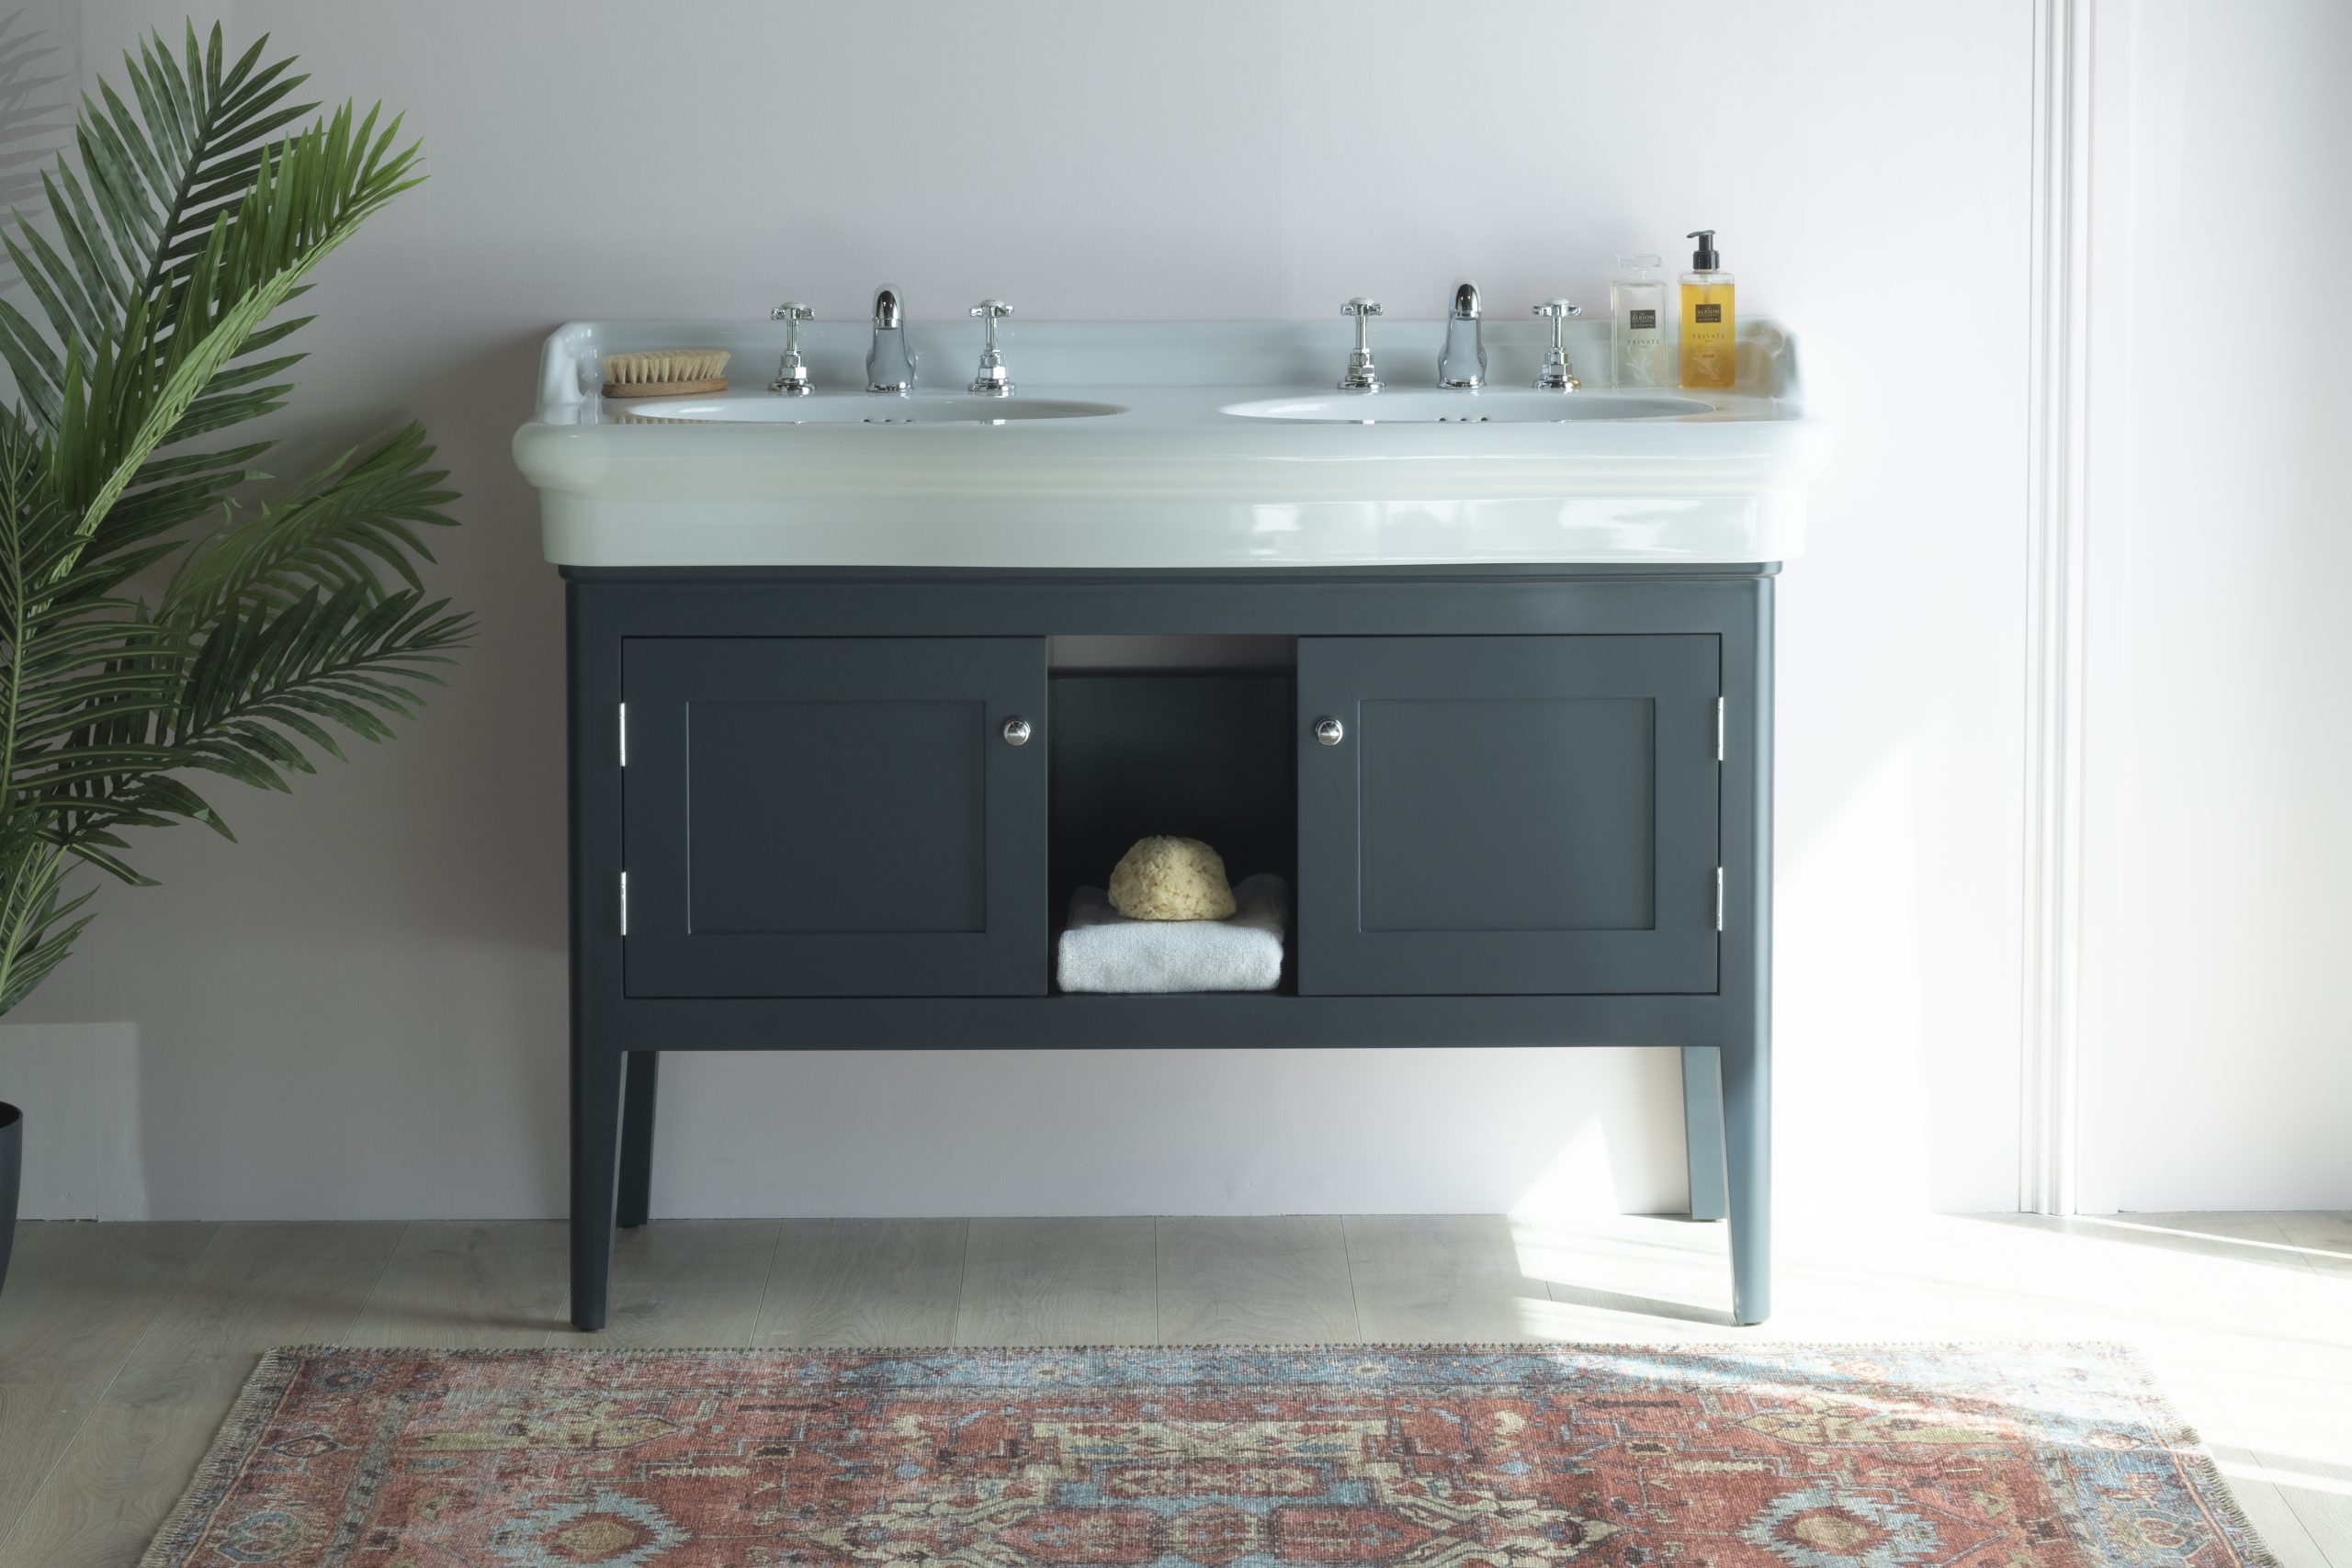 Albion's Siena Basin painted in a traditional Farrow and Ball colour.